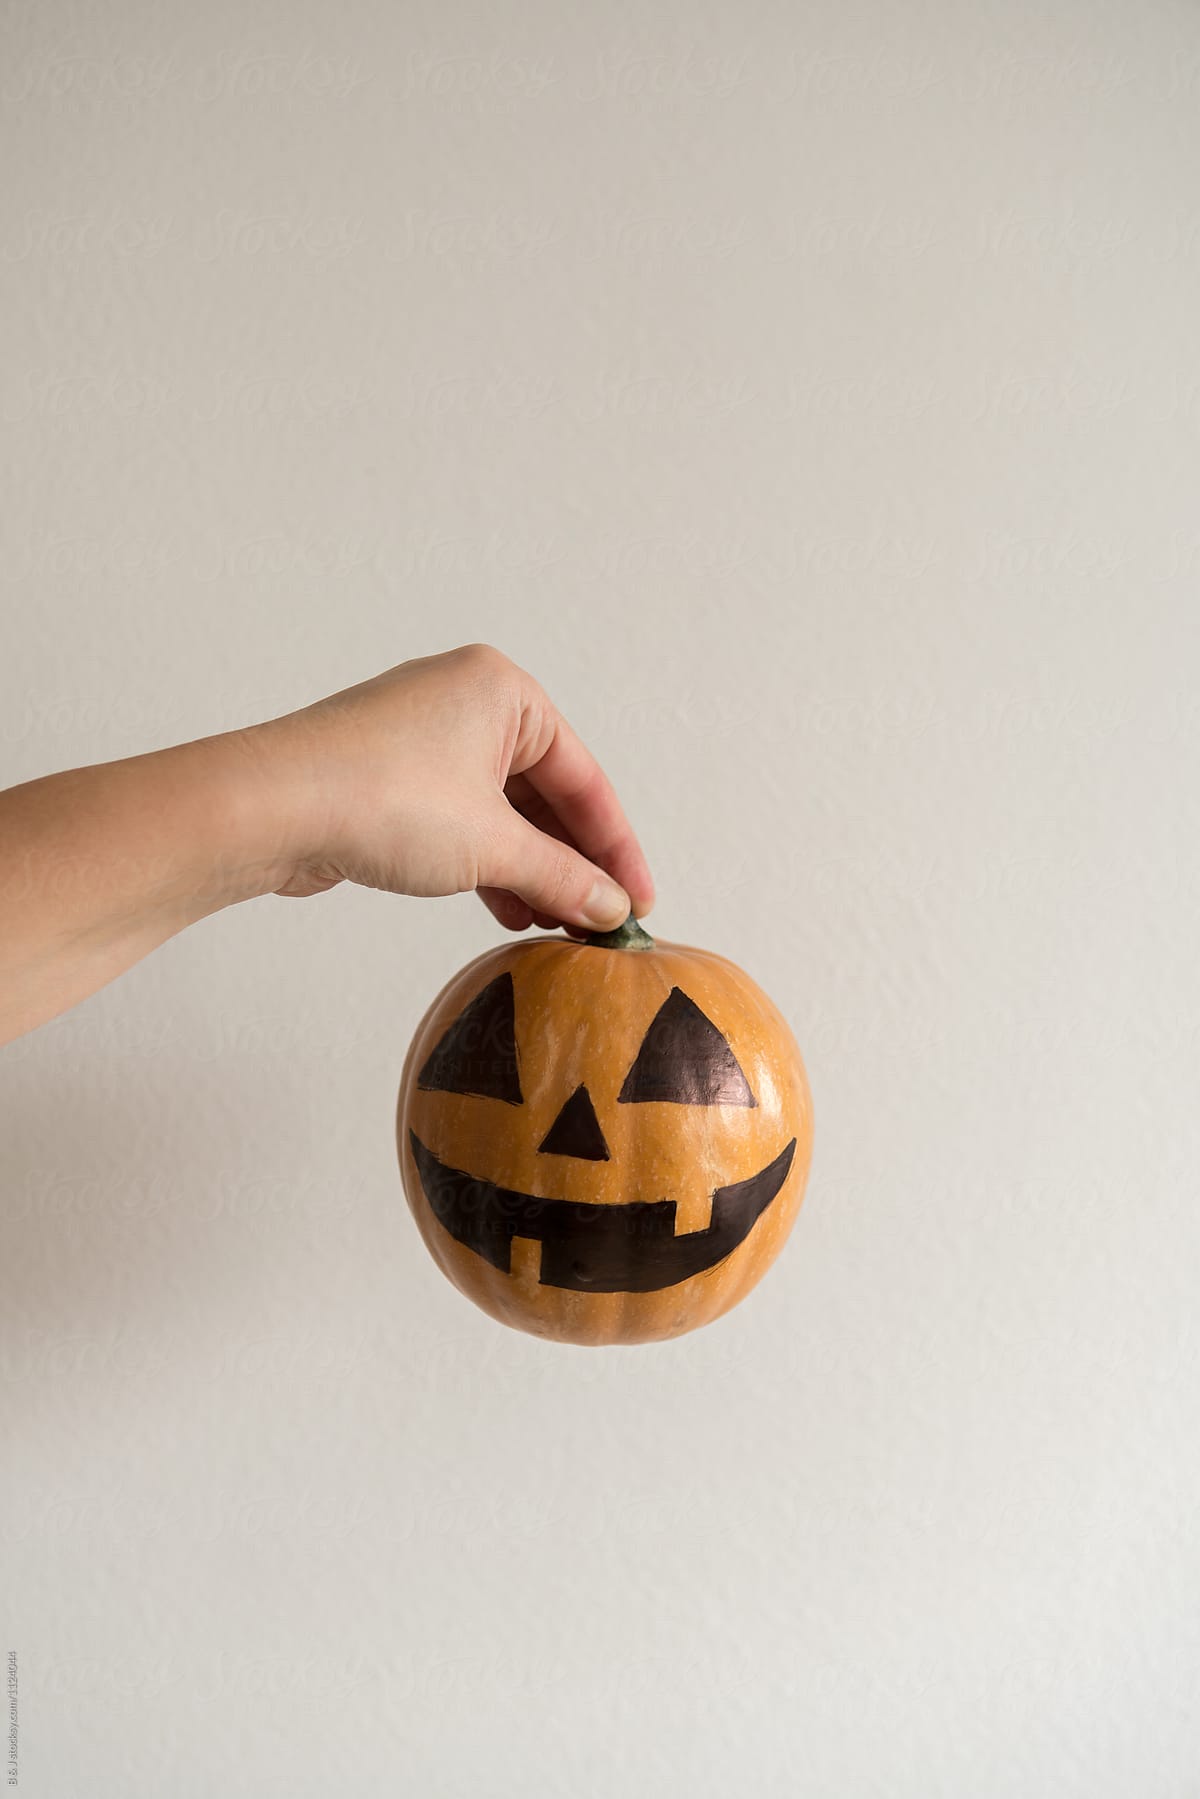 Holding a jack-o'-lantern in hand